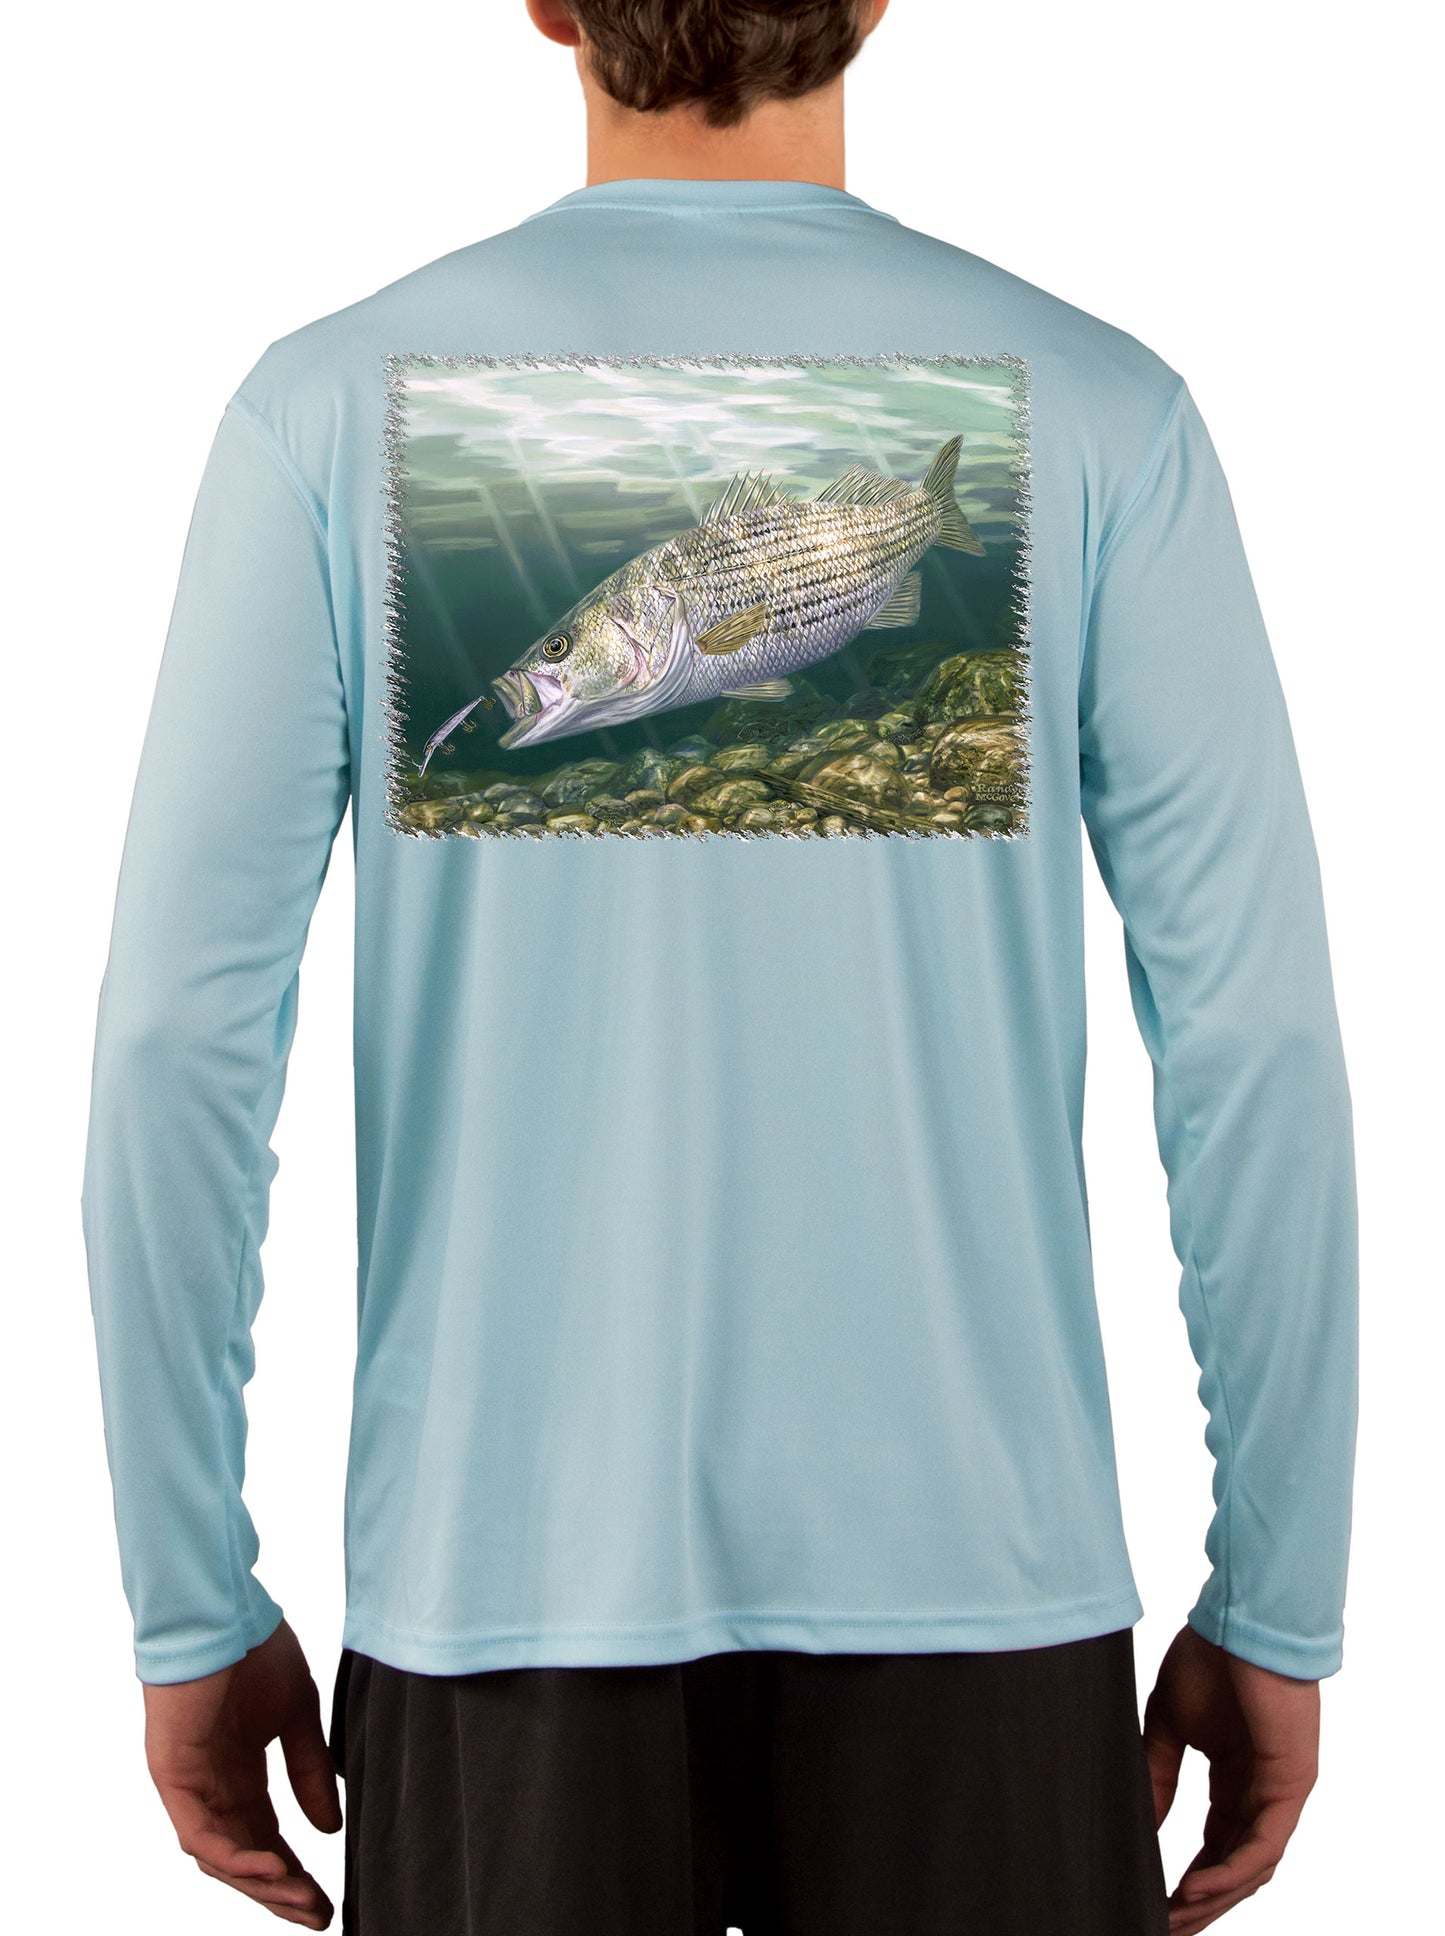 [New] Striper Fishing Shirts for Men with Striped Bass Fish Artwork Small / Seagrass